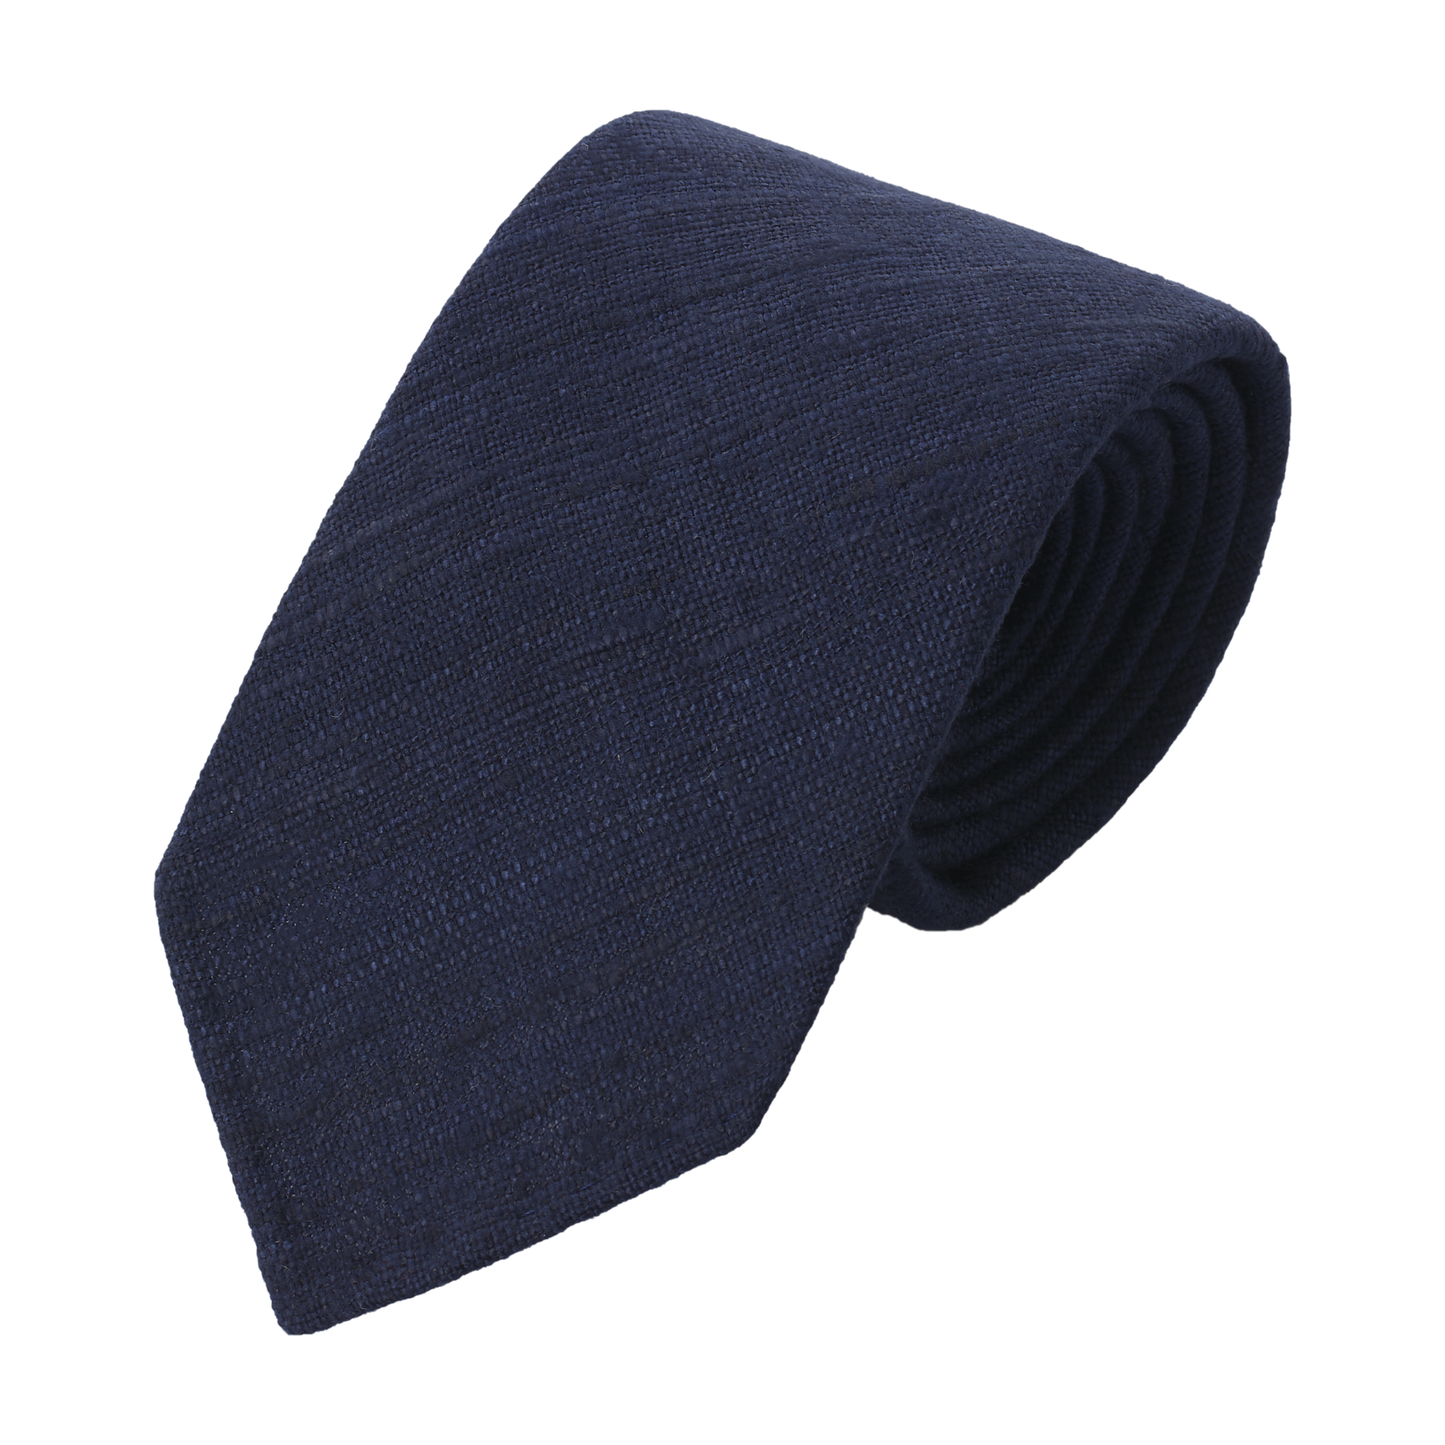 Woven Tussah Handrolled Blue Tie